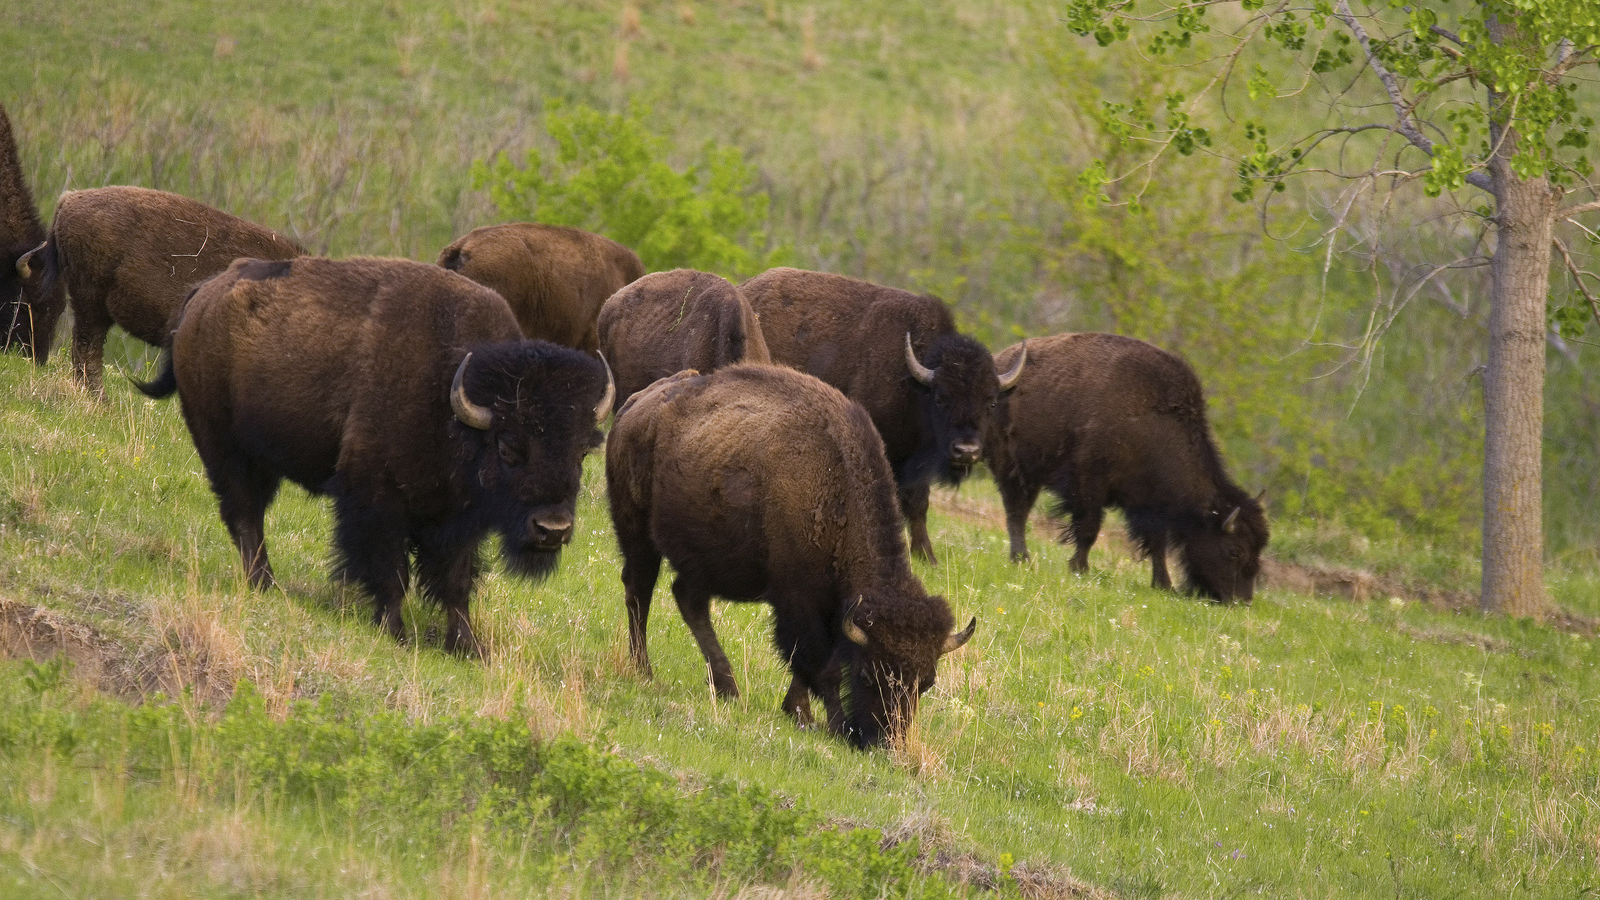 American Bison (Bison bison) feeding on spring grass at The Nature Conservancy's Broken Kettle Grasslands in the northern Loess Hills of Iowa. Photo © The Nature Conservancy (Chris Helzer)